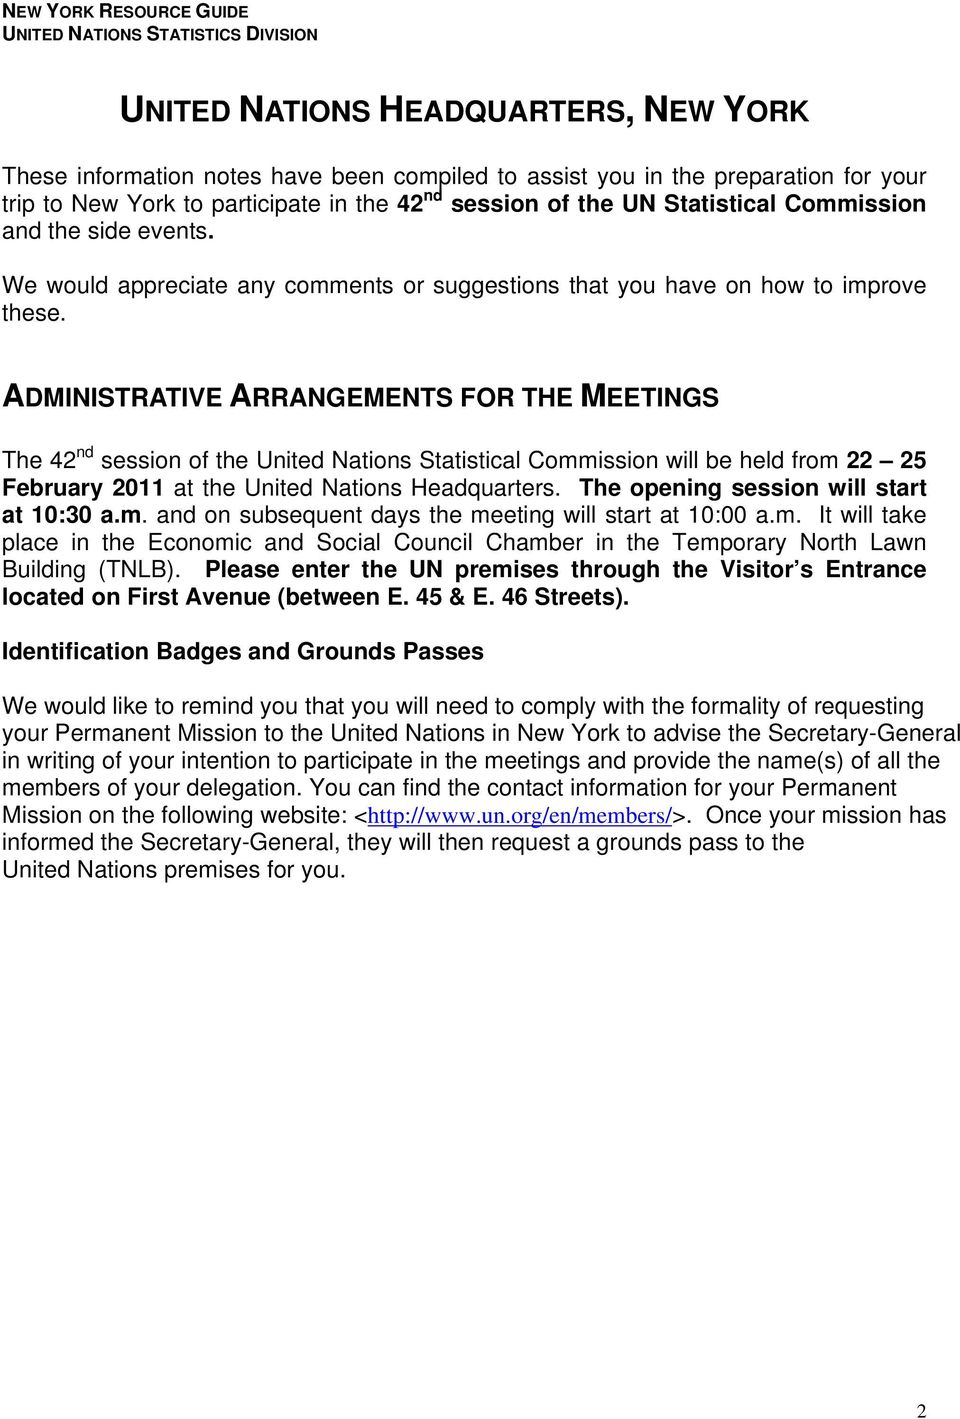 ADMINISTRATIVE ARRANGEMENTS FOR THE MEETINGS The 42 nd session of the United Nations Statistical Commission will be held from 22 25 February 2011 at the United Nations Headquarters.